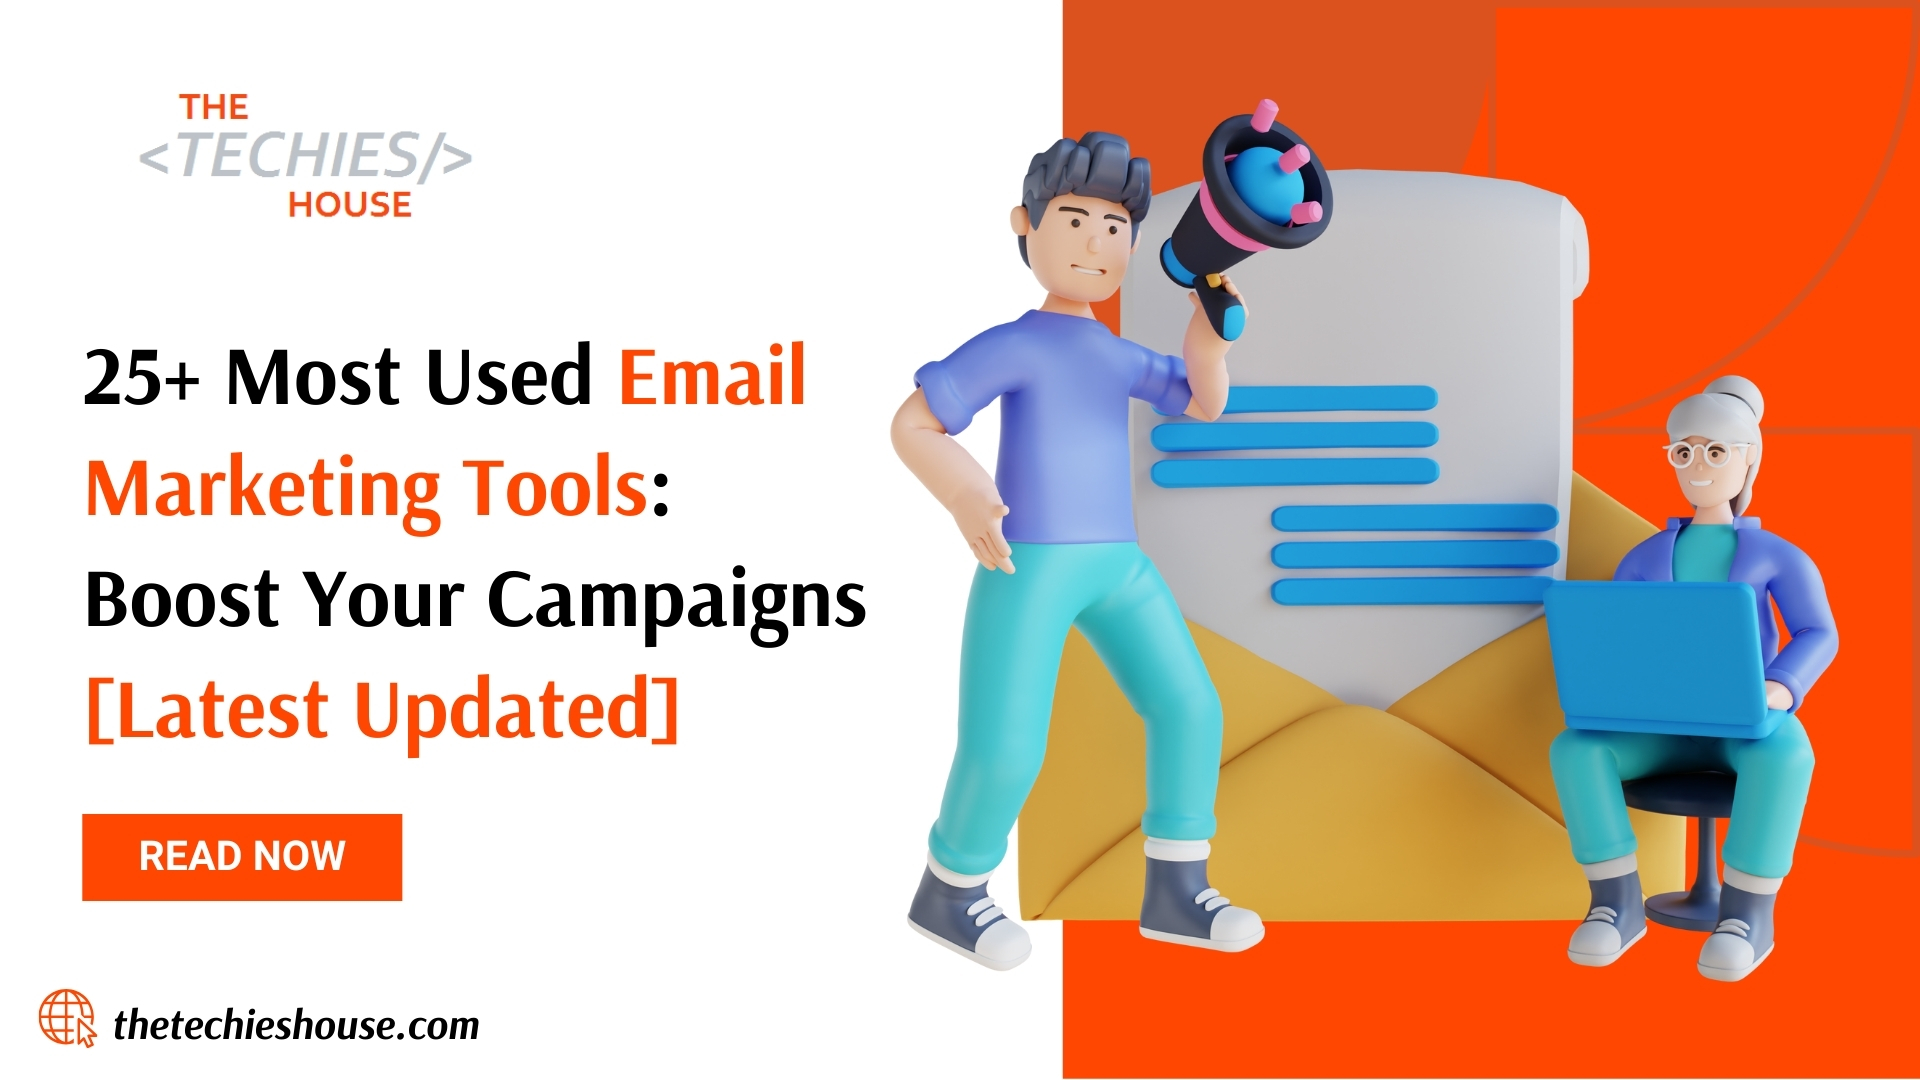 25+ Most Used Email Marketing Tools: Boost Your Campaigns [Latest Updated]